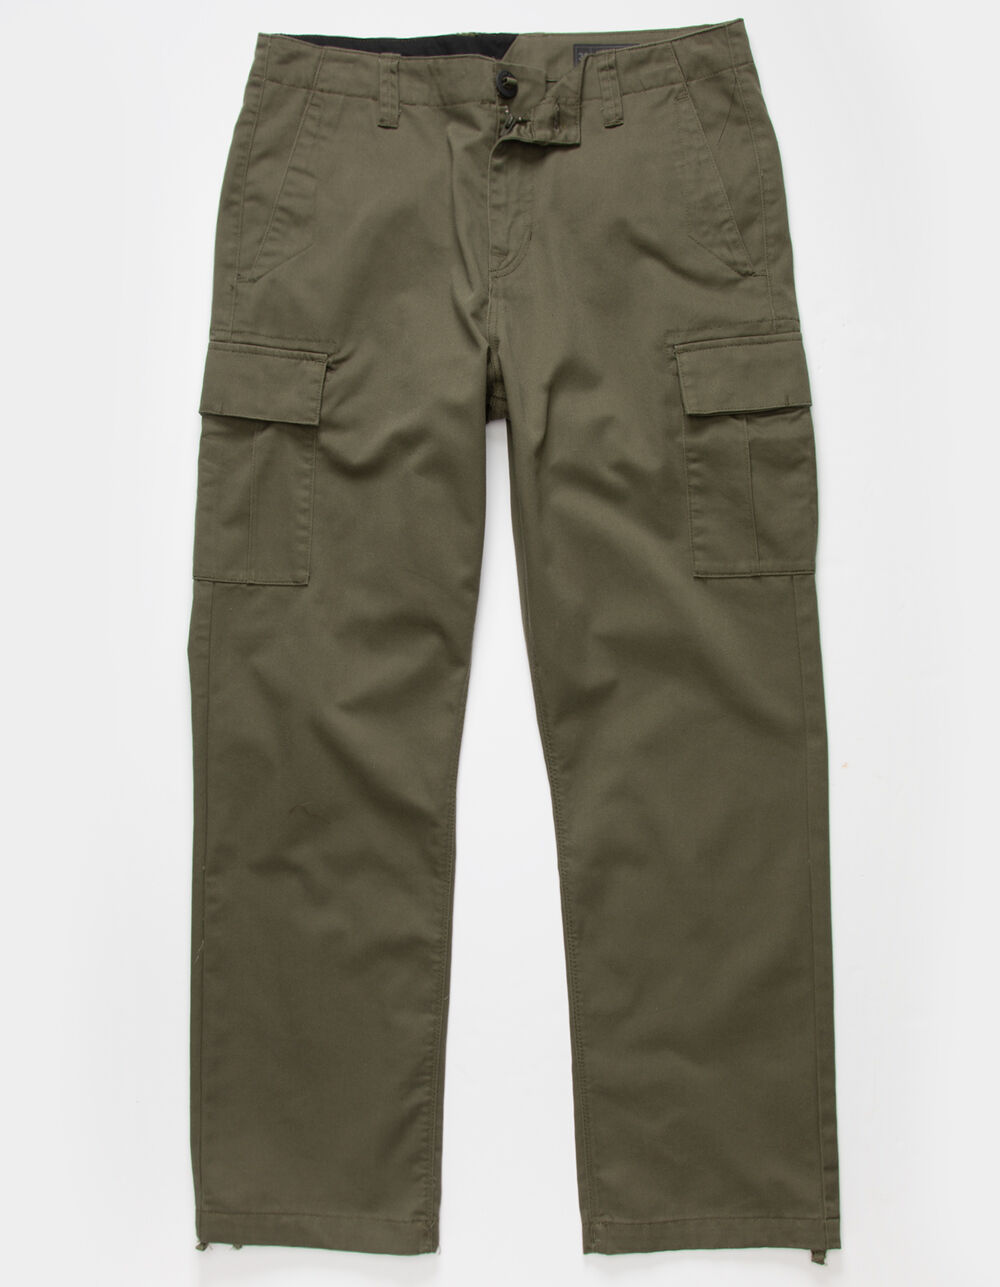 VOLCOM March Mens Cargo Pants - MILITARY | Tillys